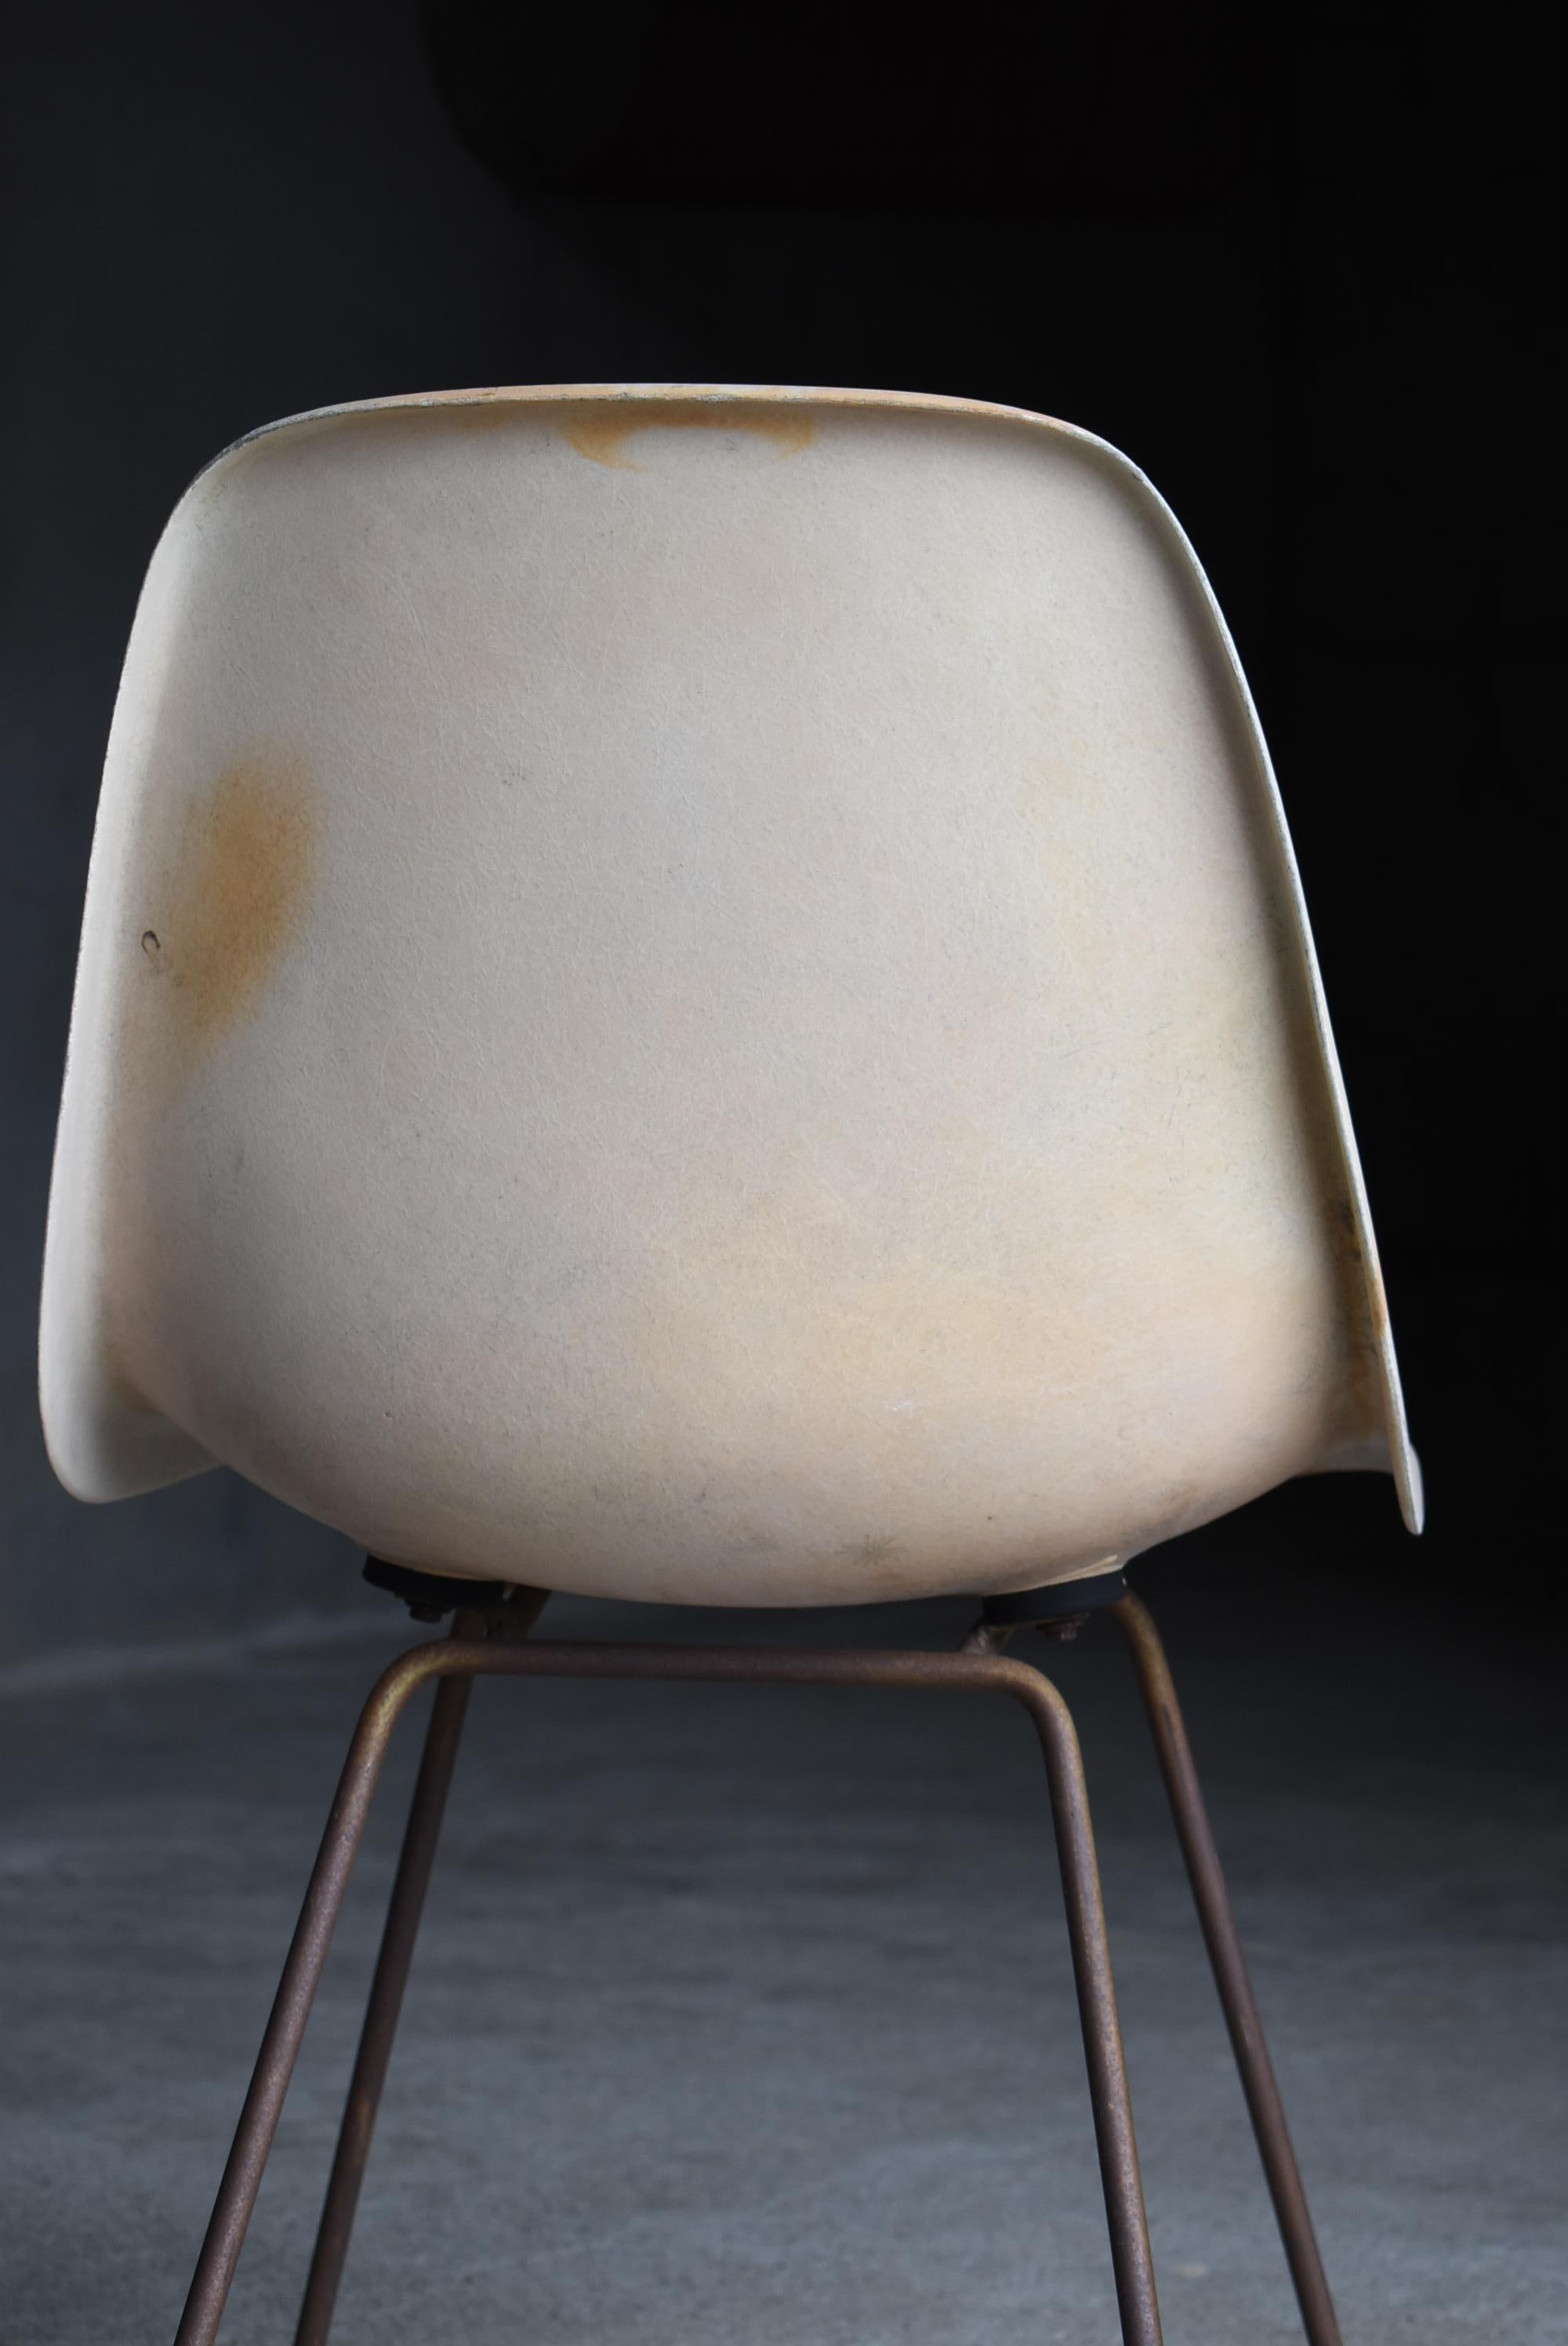 Japanese Old Modern Chair Mid-Century 1940s-1960s  For Sale 5